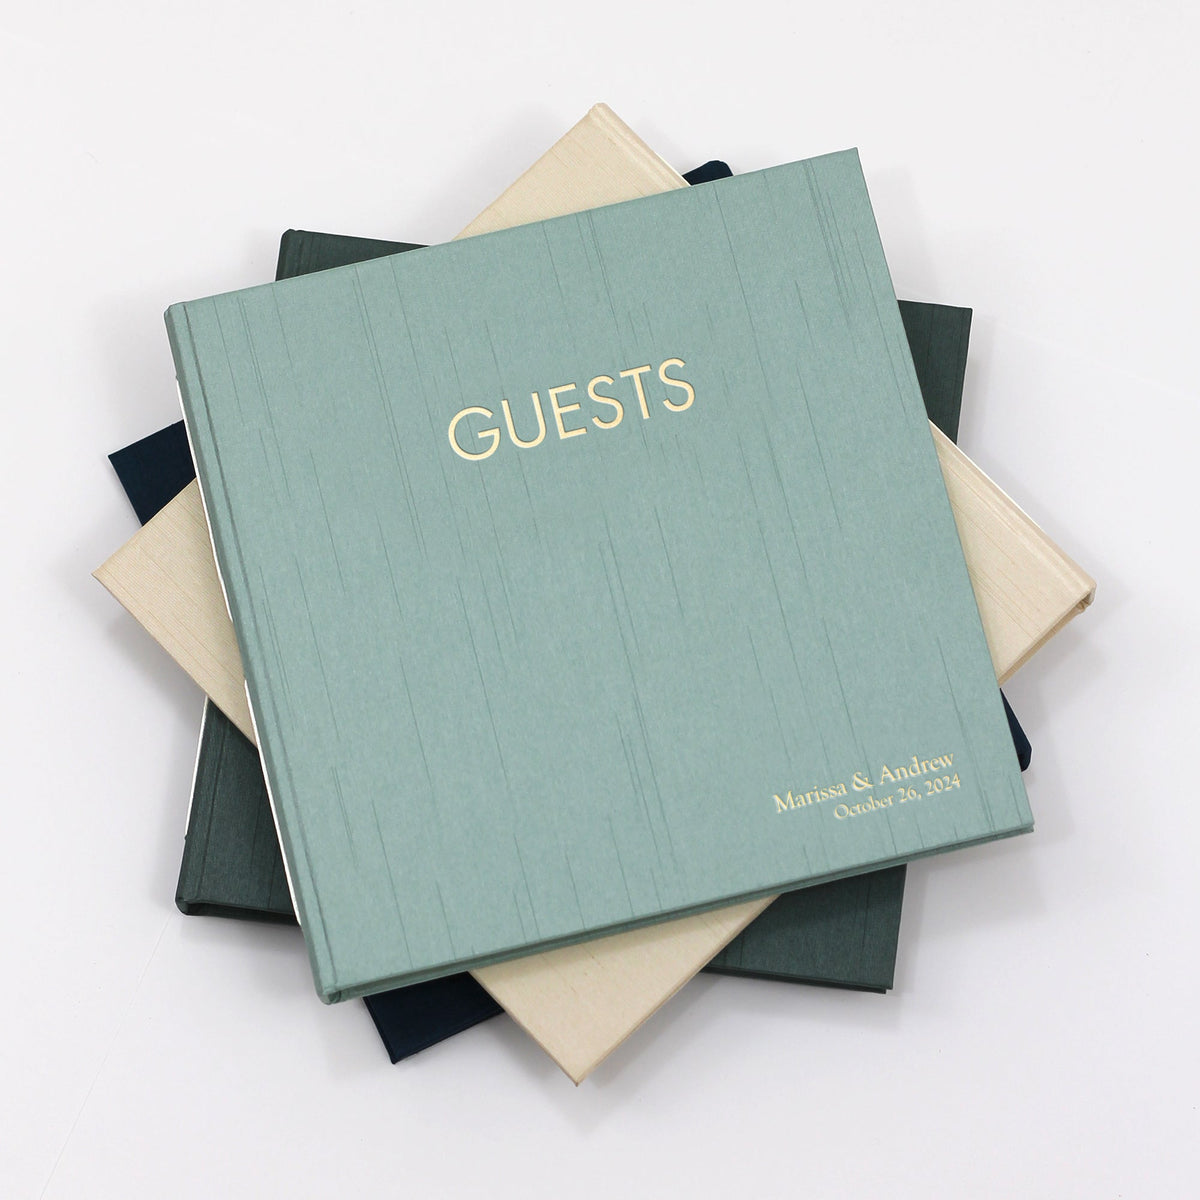 Event Guestbook Embossed with “Guests” | Cover: Ocean Blue Vegan Leather | Available Personalized